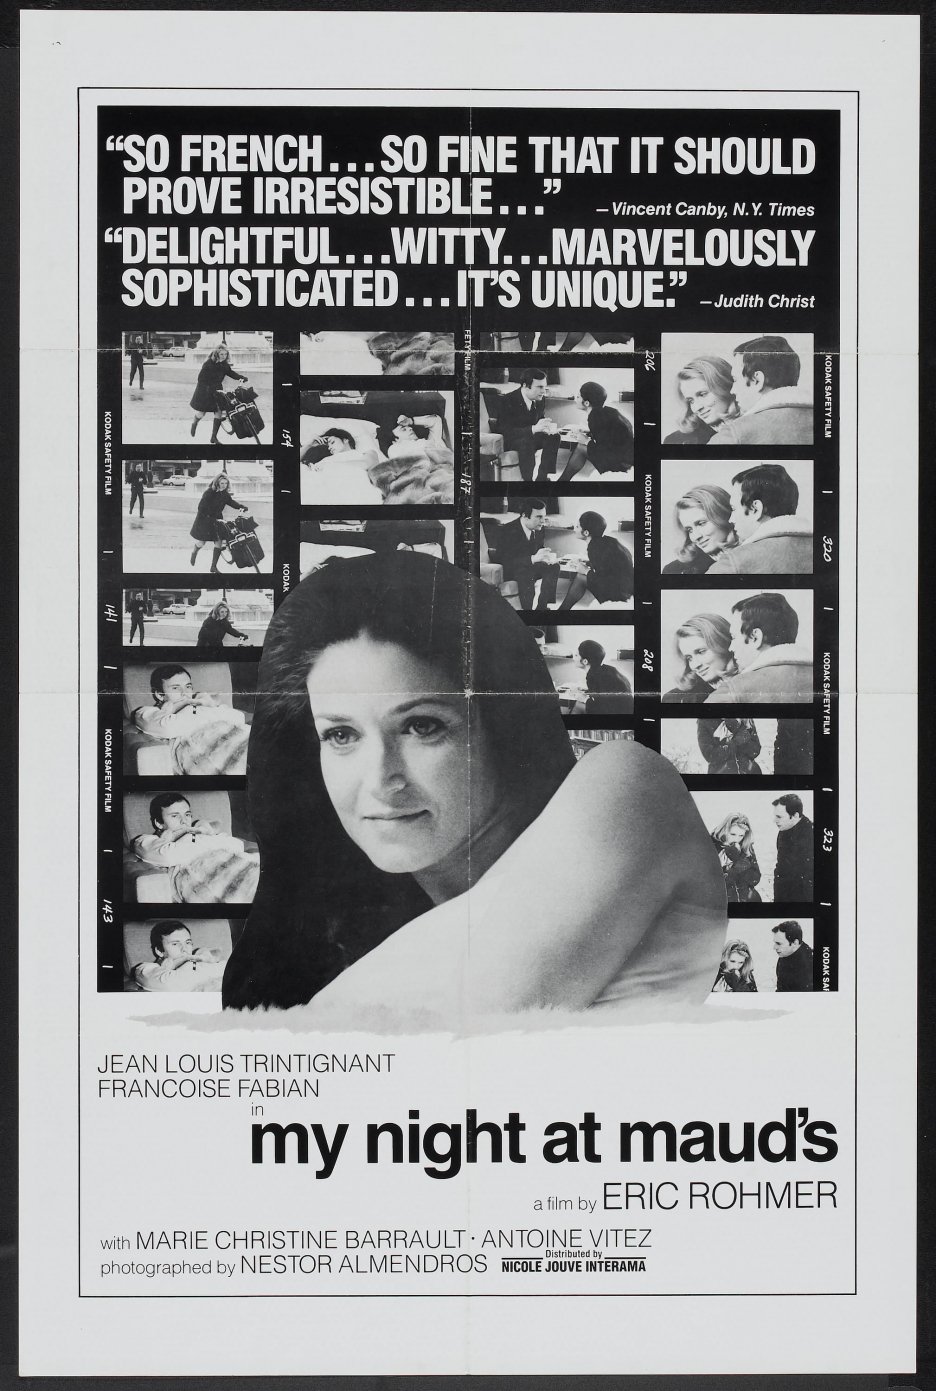 Poster of the movie My Night at Maud's